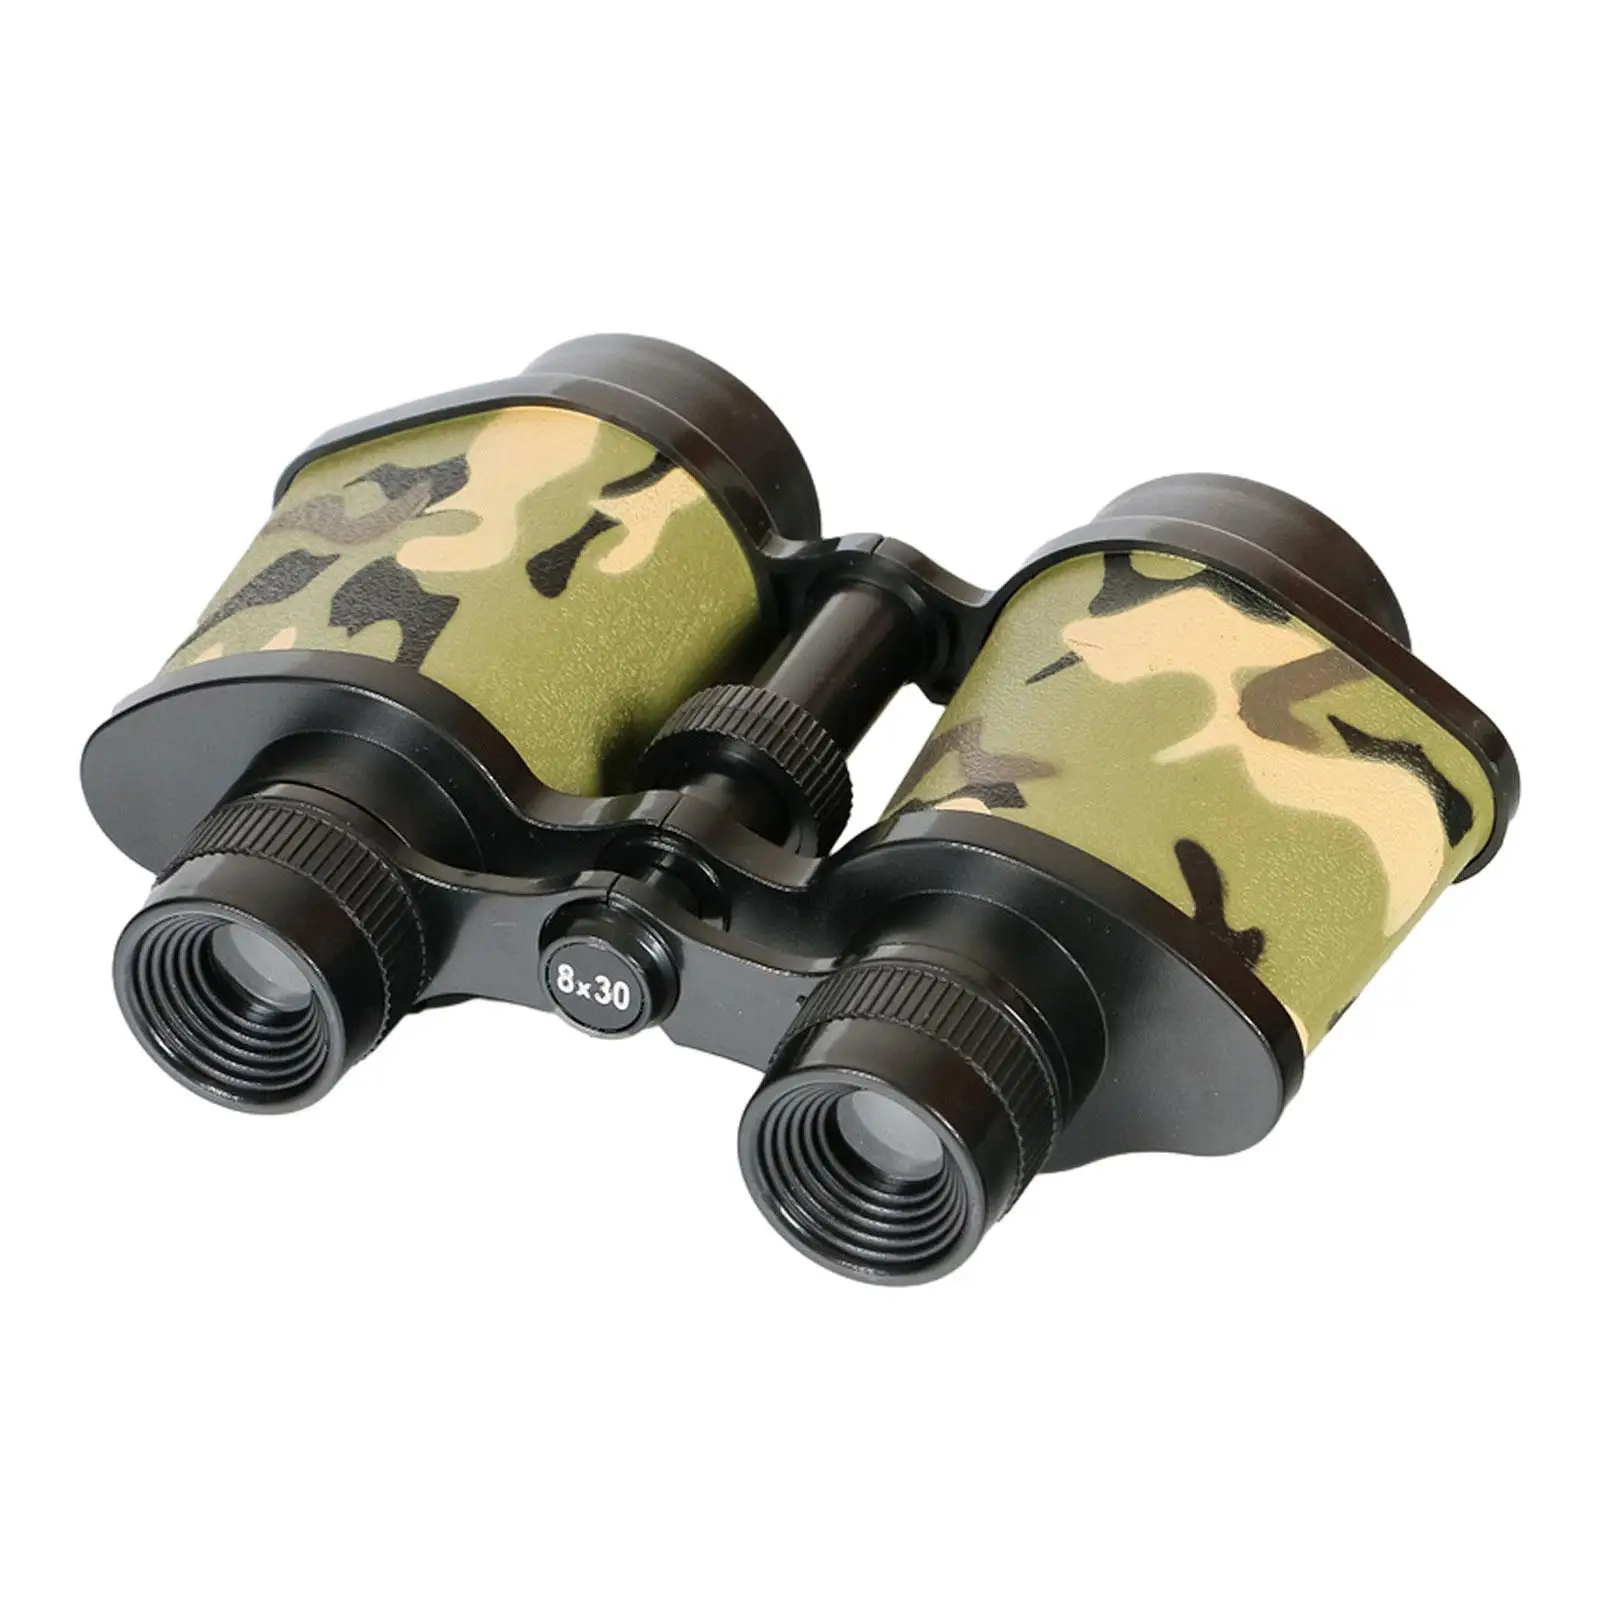 Kids Binoculars Toy 8x30 Professional with Neck Lanyard Jungle Binoculars Toy for Camping Hunting Sports Presents Exploration